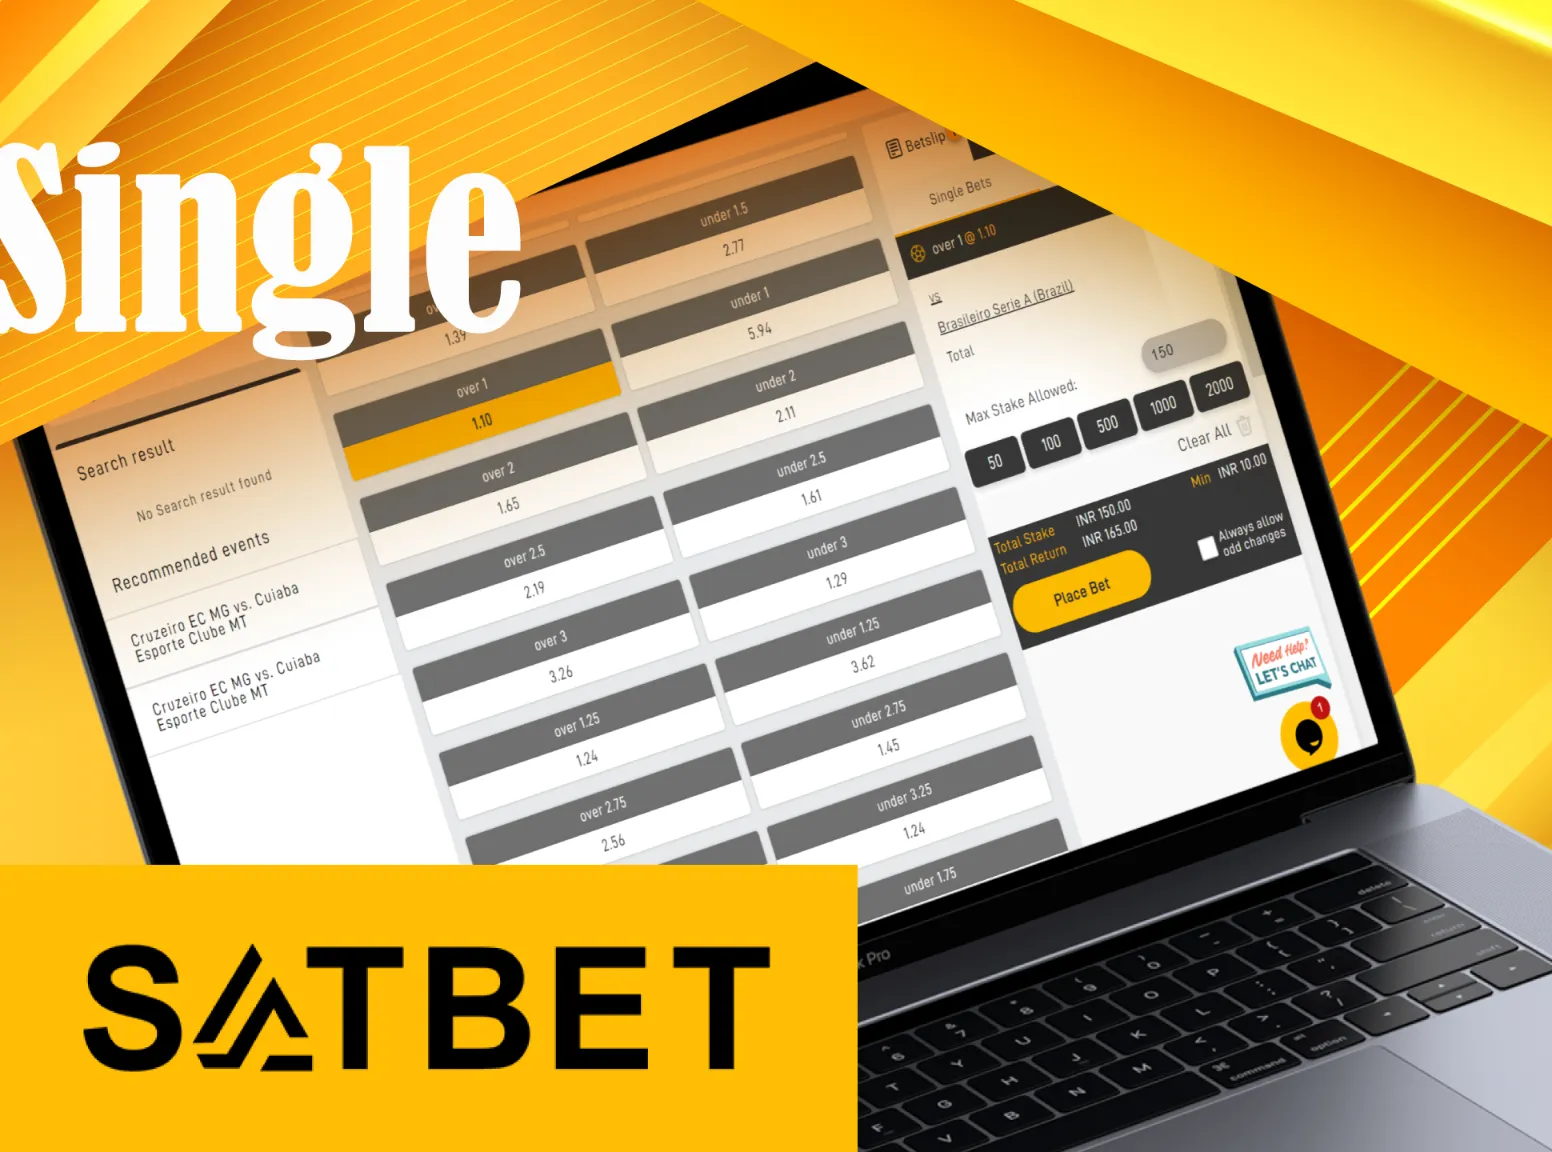 Make single Satbet bet and wait for result.